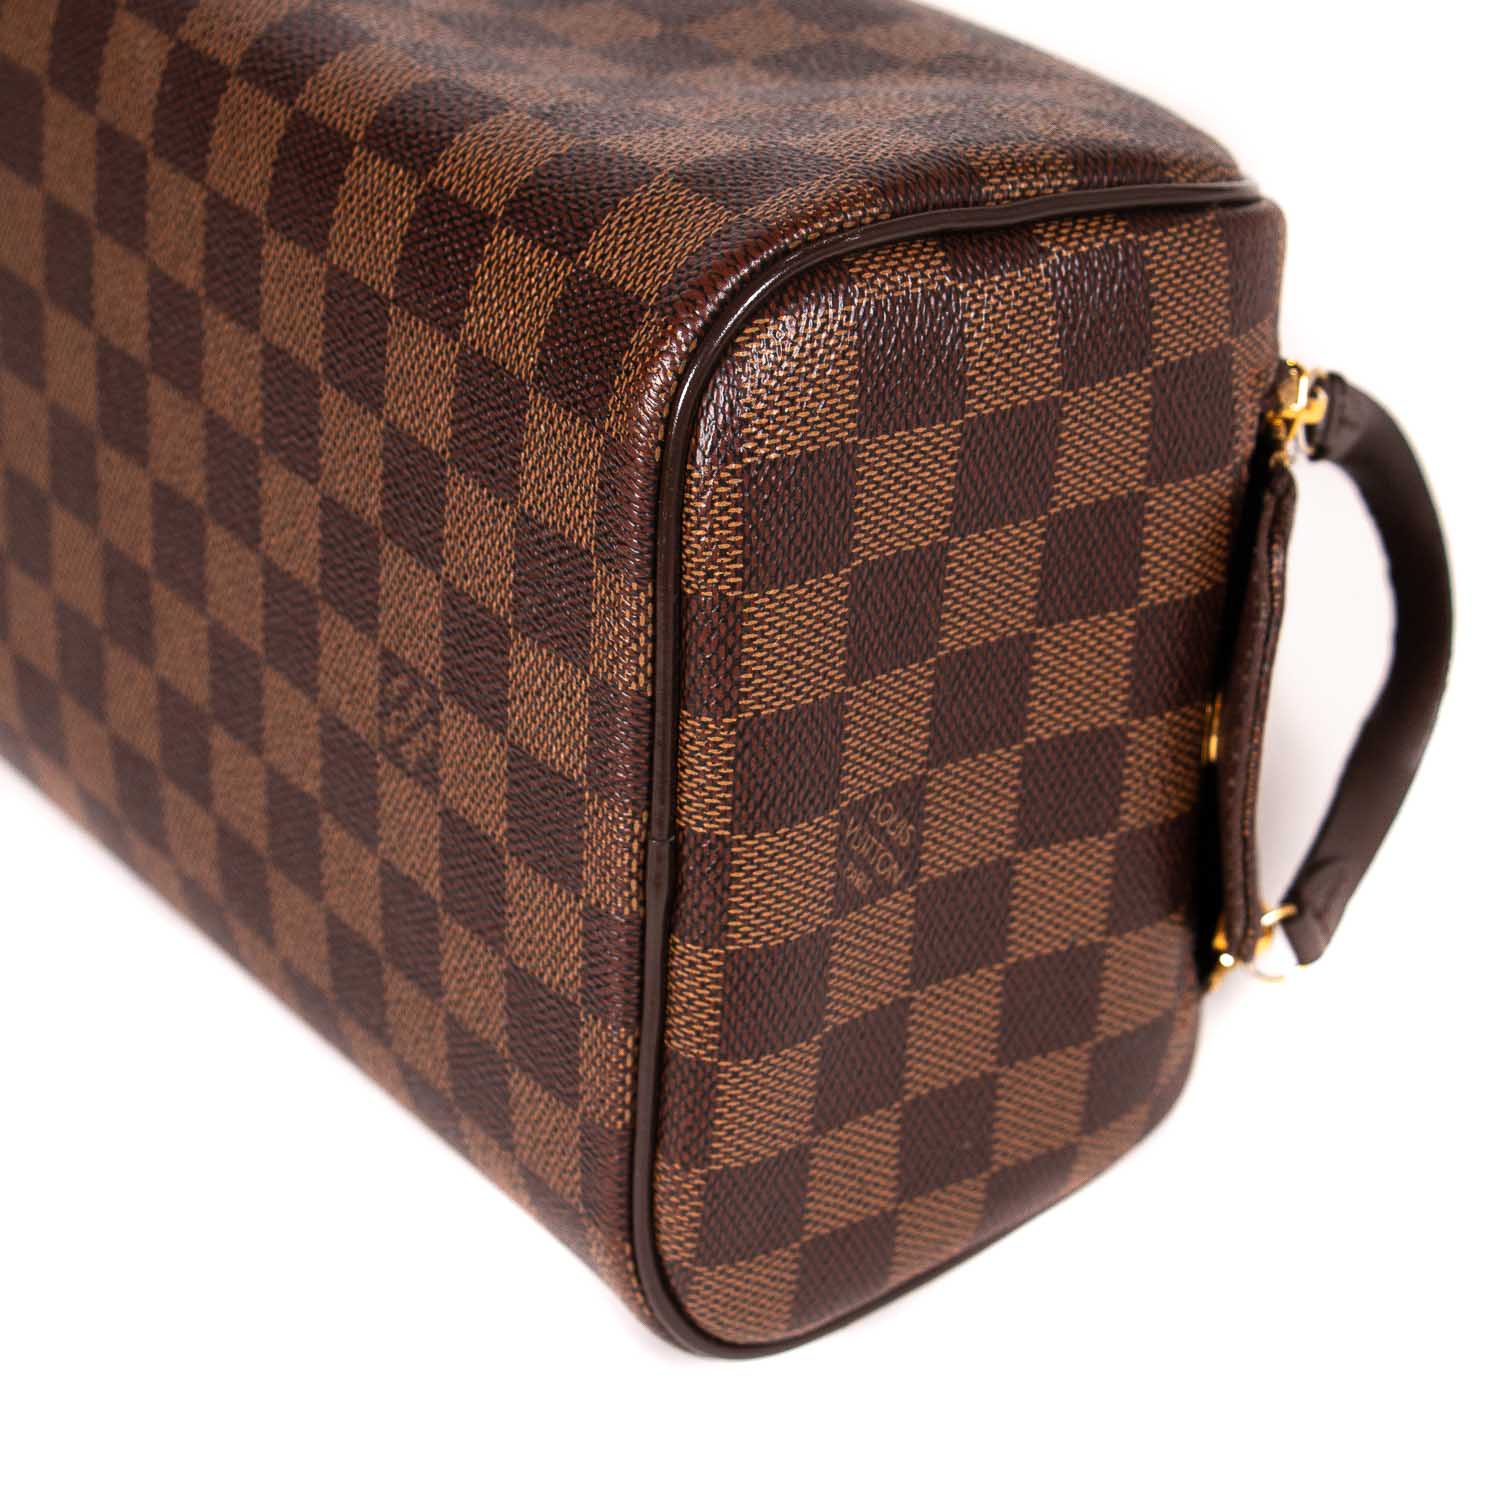 Louis Vuitton King Size Toiletry Bag 28Cm Damier Ebene Canvas Spring/Summer  2019 Collection N47528 - Luxury Bags Limited